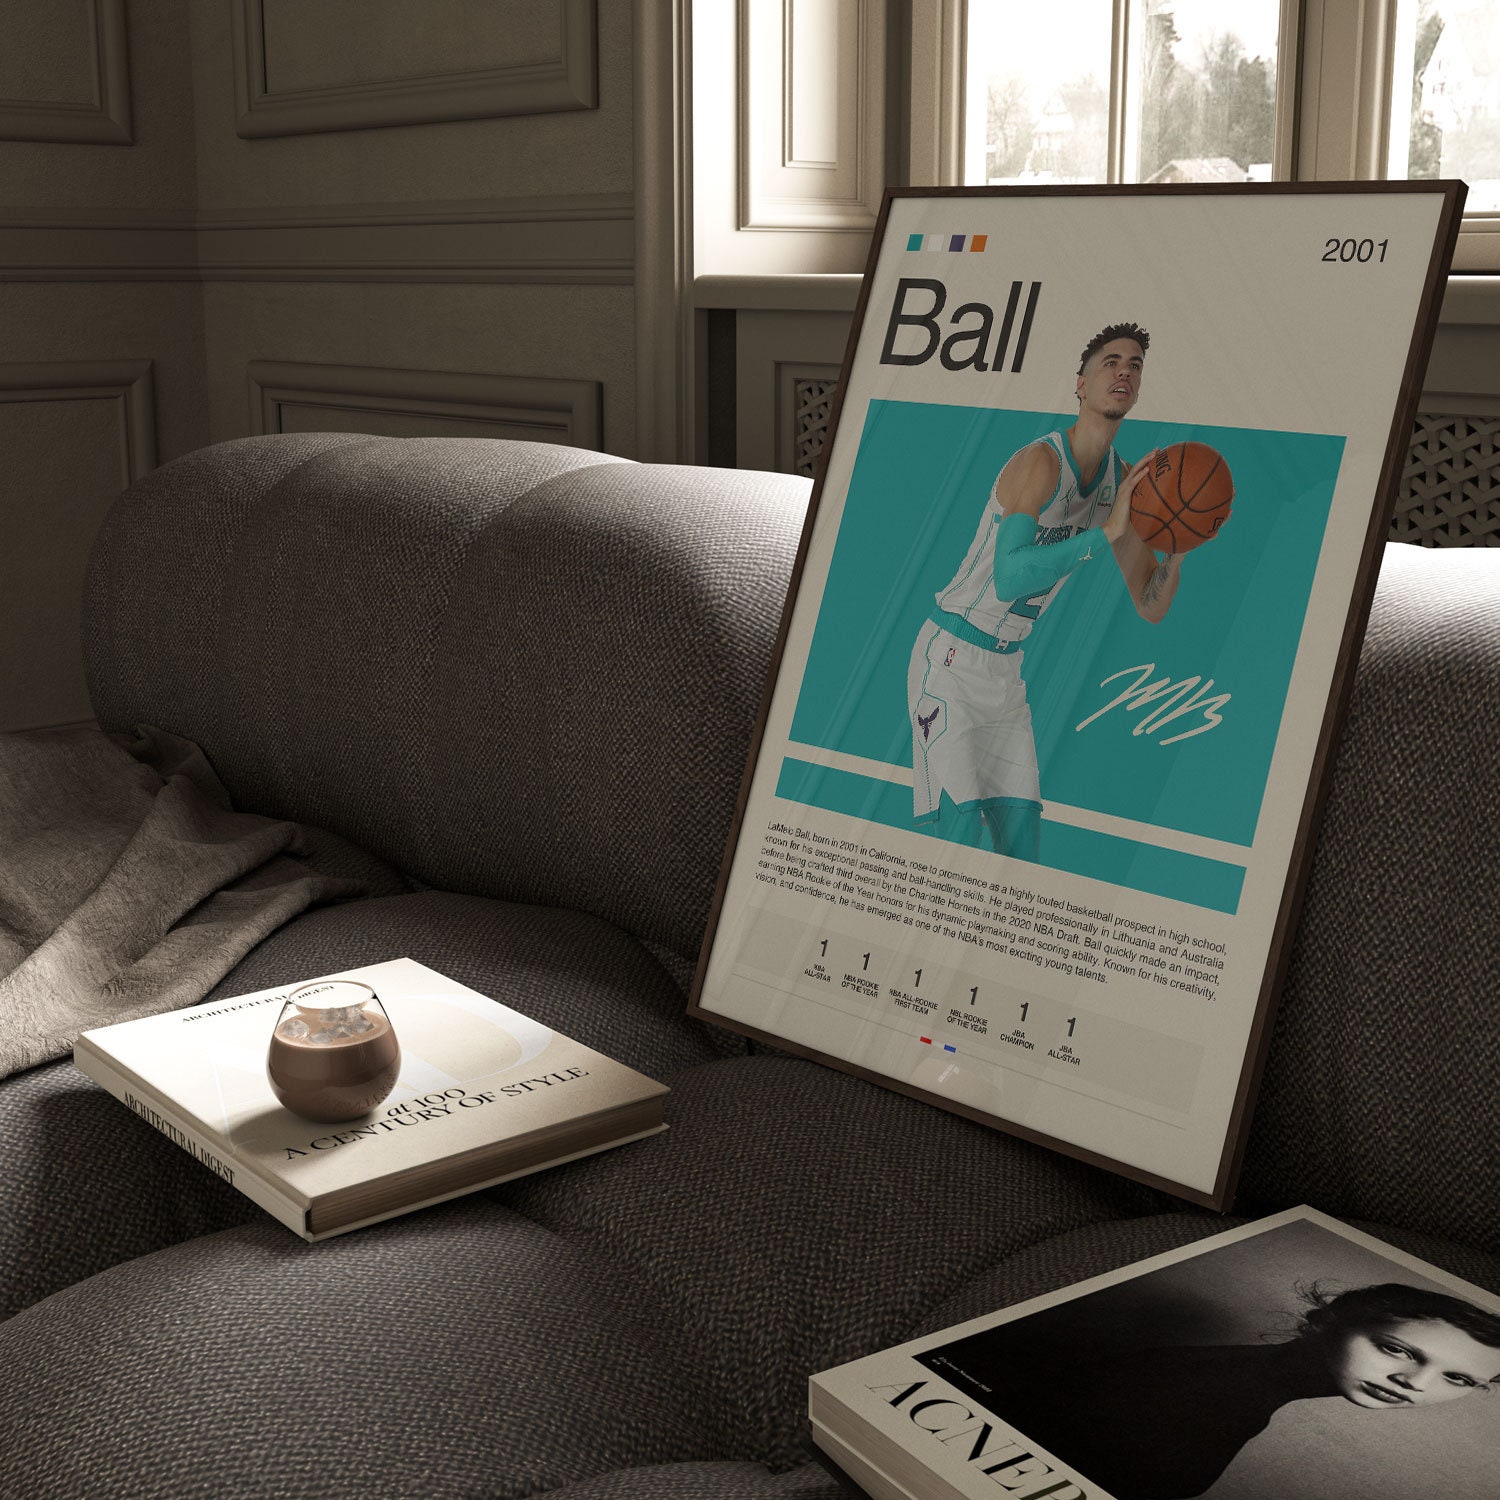 LaMelo Ball Poster, Charlotte Hornets, NBA Poster, Sports Poster, Mid Century Modern, NBA Fans, Basketball Gift, Sports Bedroom Posters